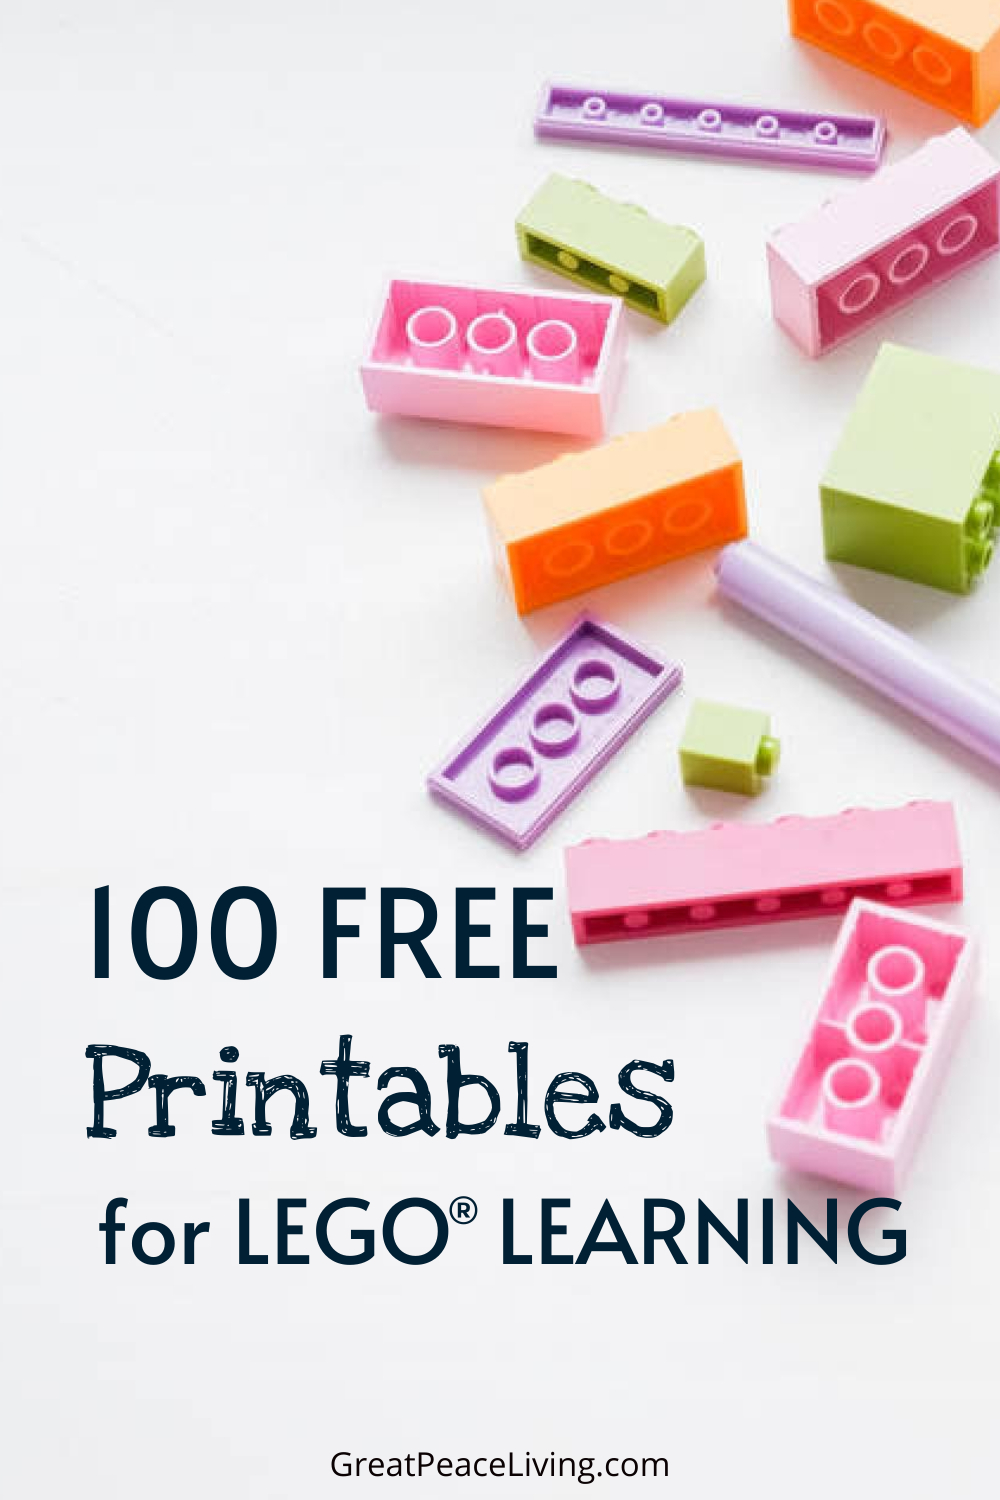 100 Free LEGO Learning Printables